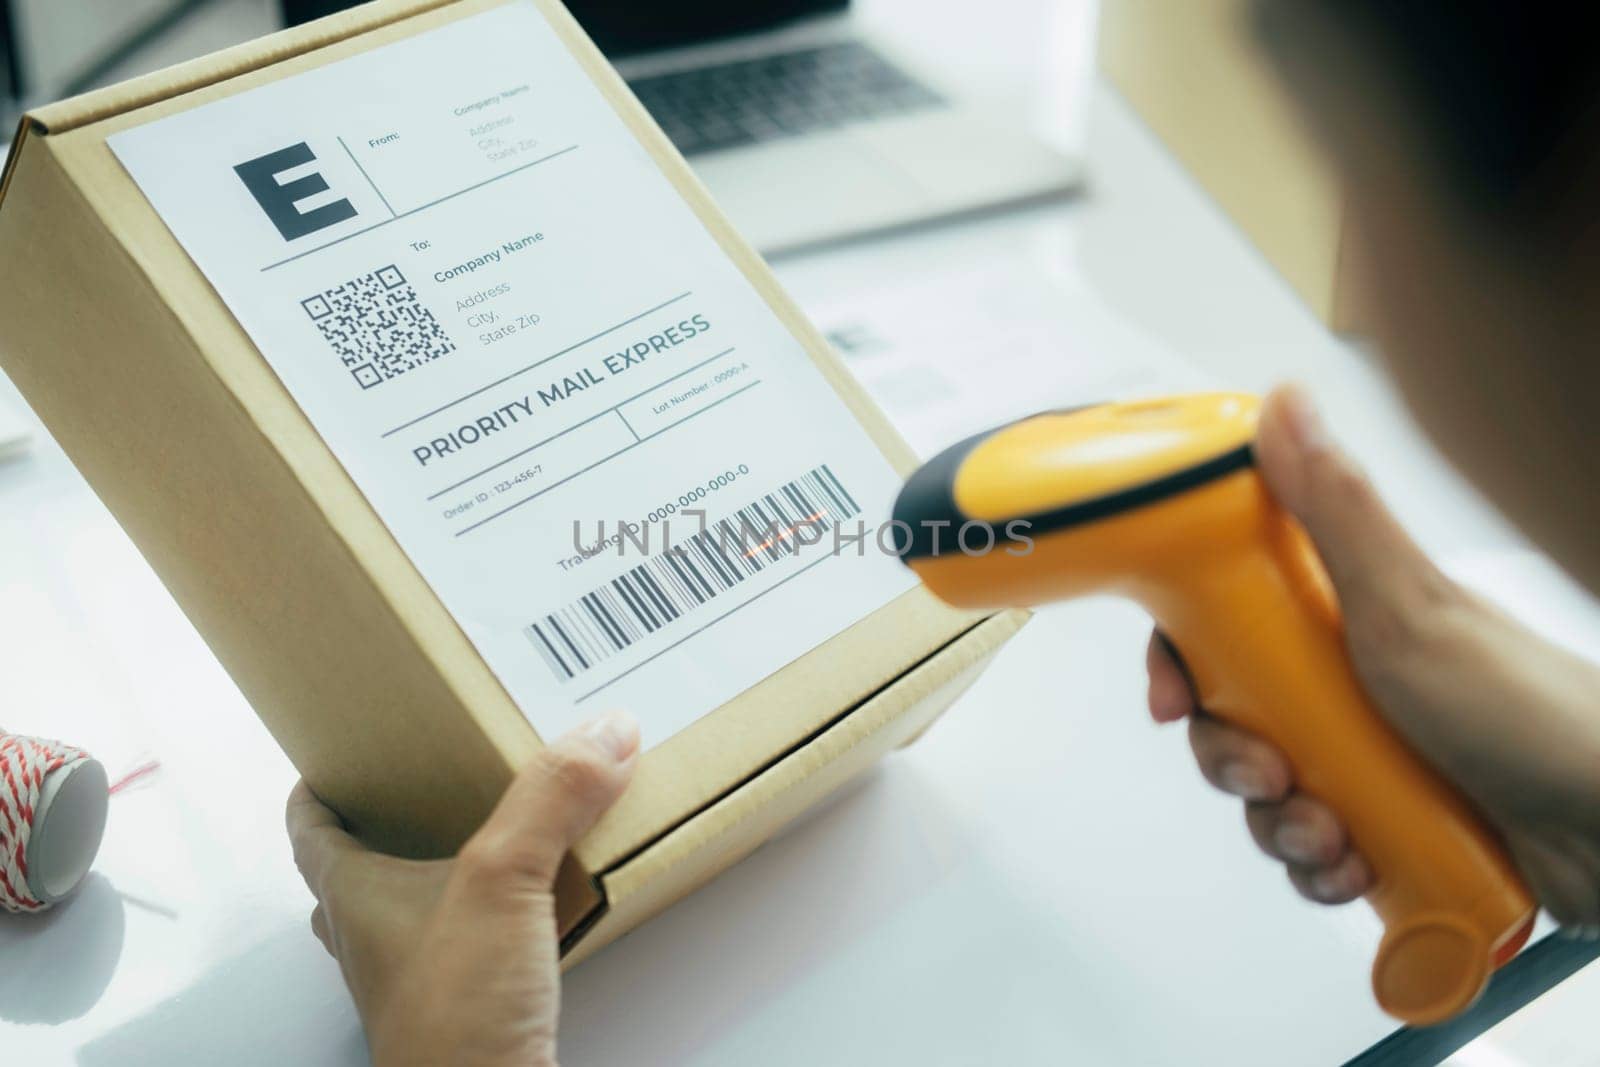 Scanning parcel barcode before shipment.. by ijeab